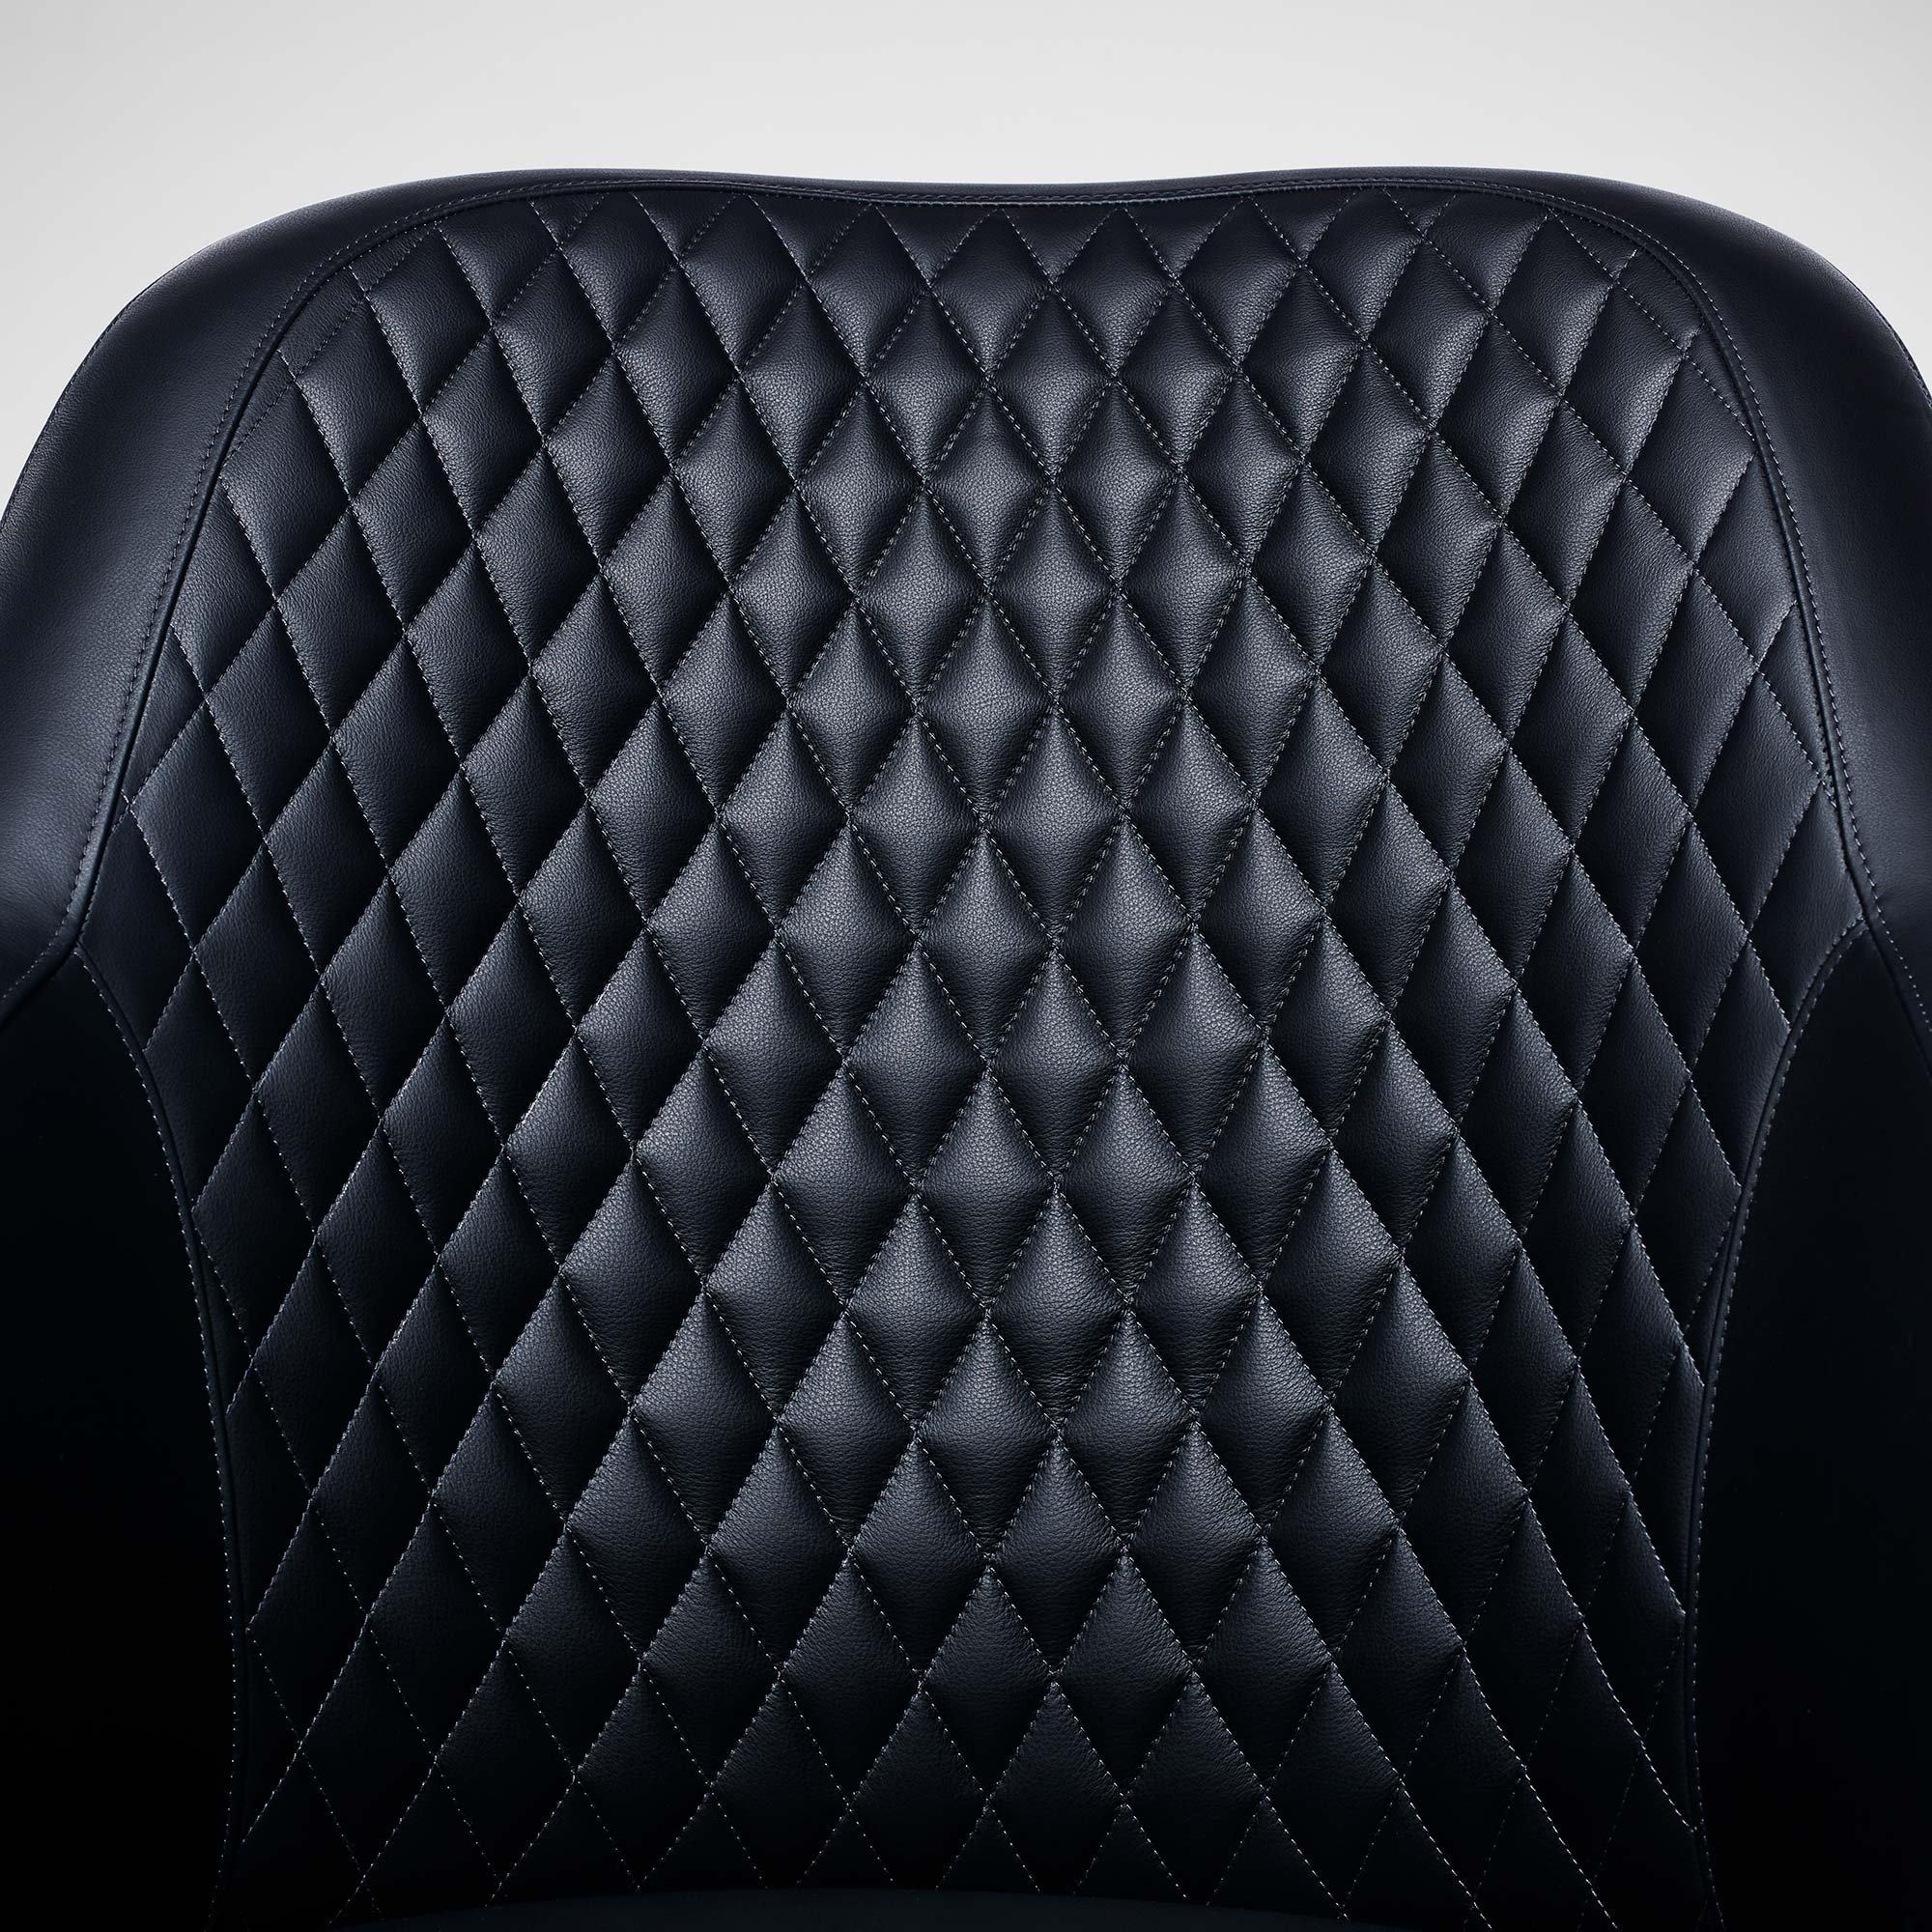 The classic office chair receives a contemporary LINLEY twist with the Riviera Quilted desk chair. Structured and formal but reassuringly comfortable and practical, this chair features walnut armrests and titanium swivel legs elegantly finished with